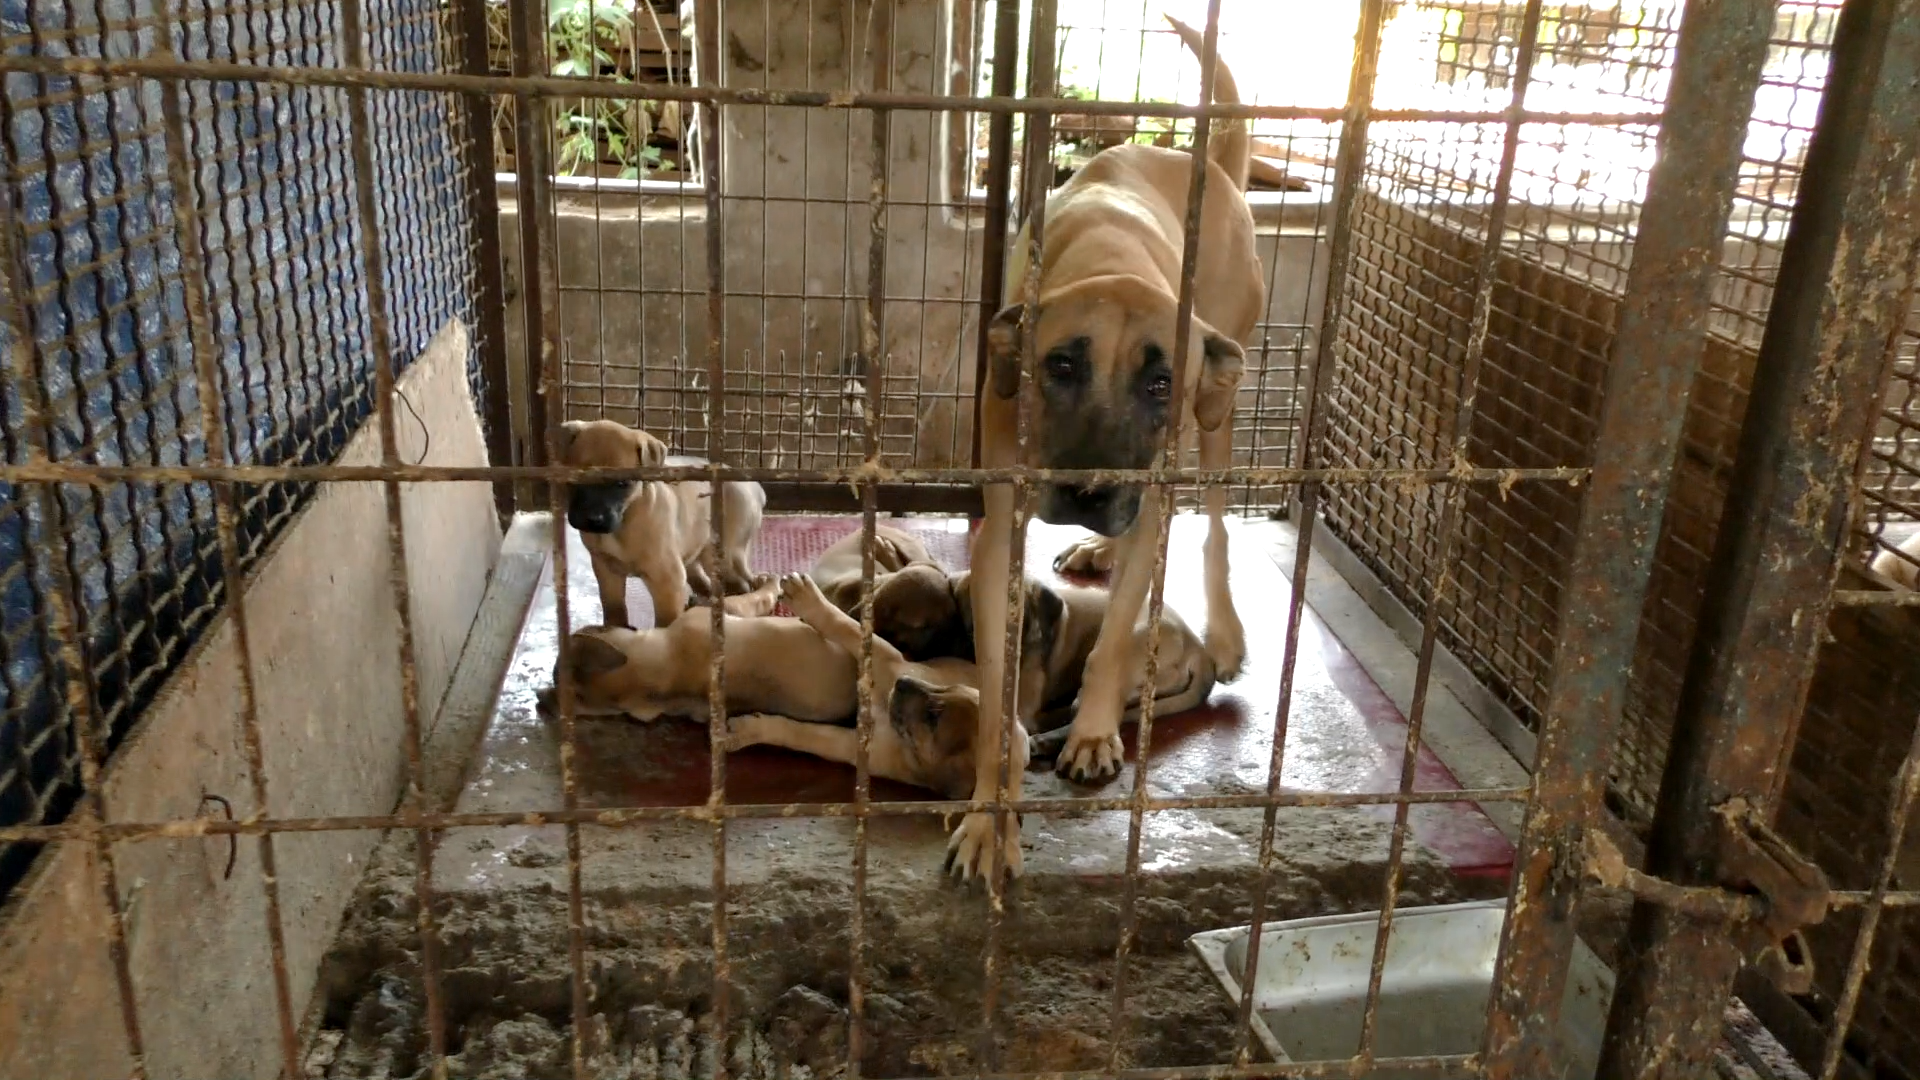 Mayor Julie Pickering of The Royal Borough of Kingston upon Thames, London: Tell Friendship City, Gwanak-gu, Seoul, South Korea, That We’re Opposed to the Torture and Consumption of Dogs and Cats.